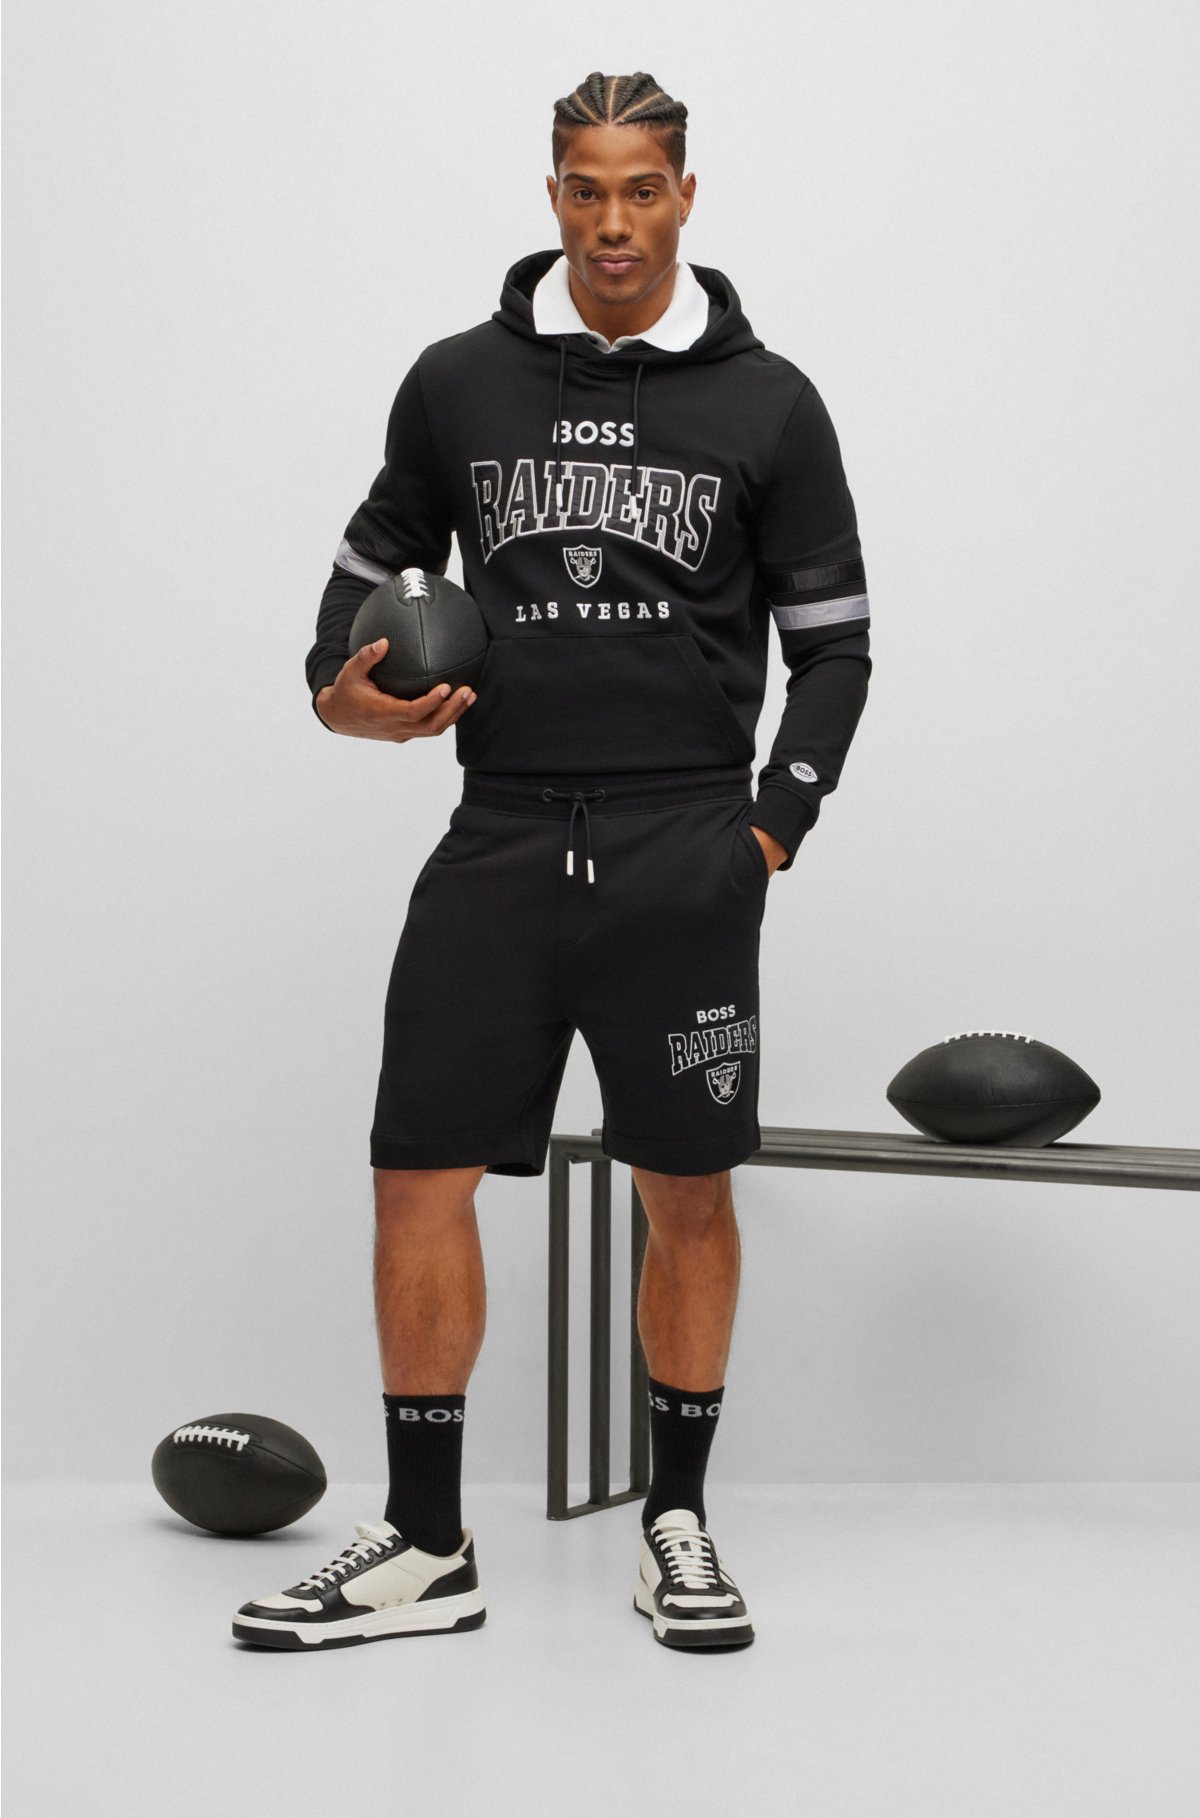 BOSS - BOSS x NFL cotton-terry shorts with collaborative branding